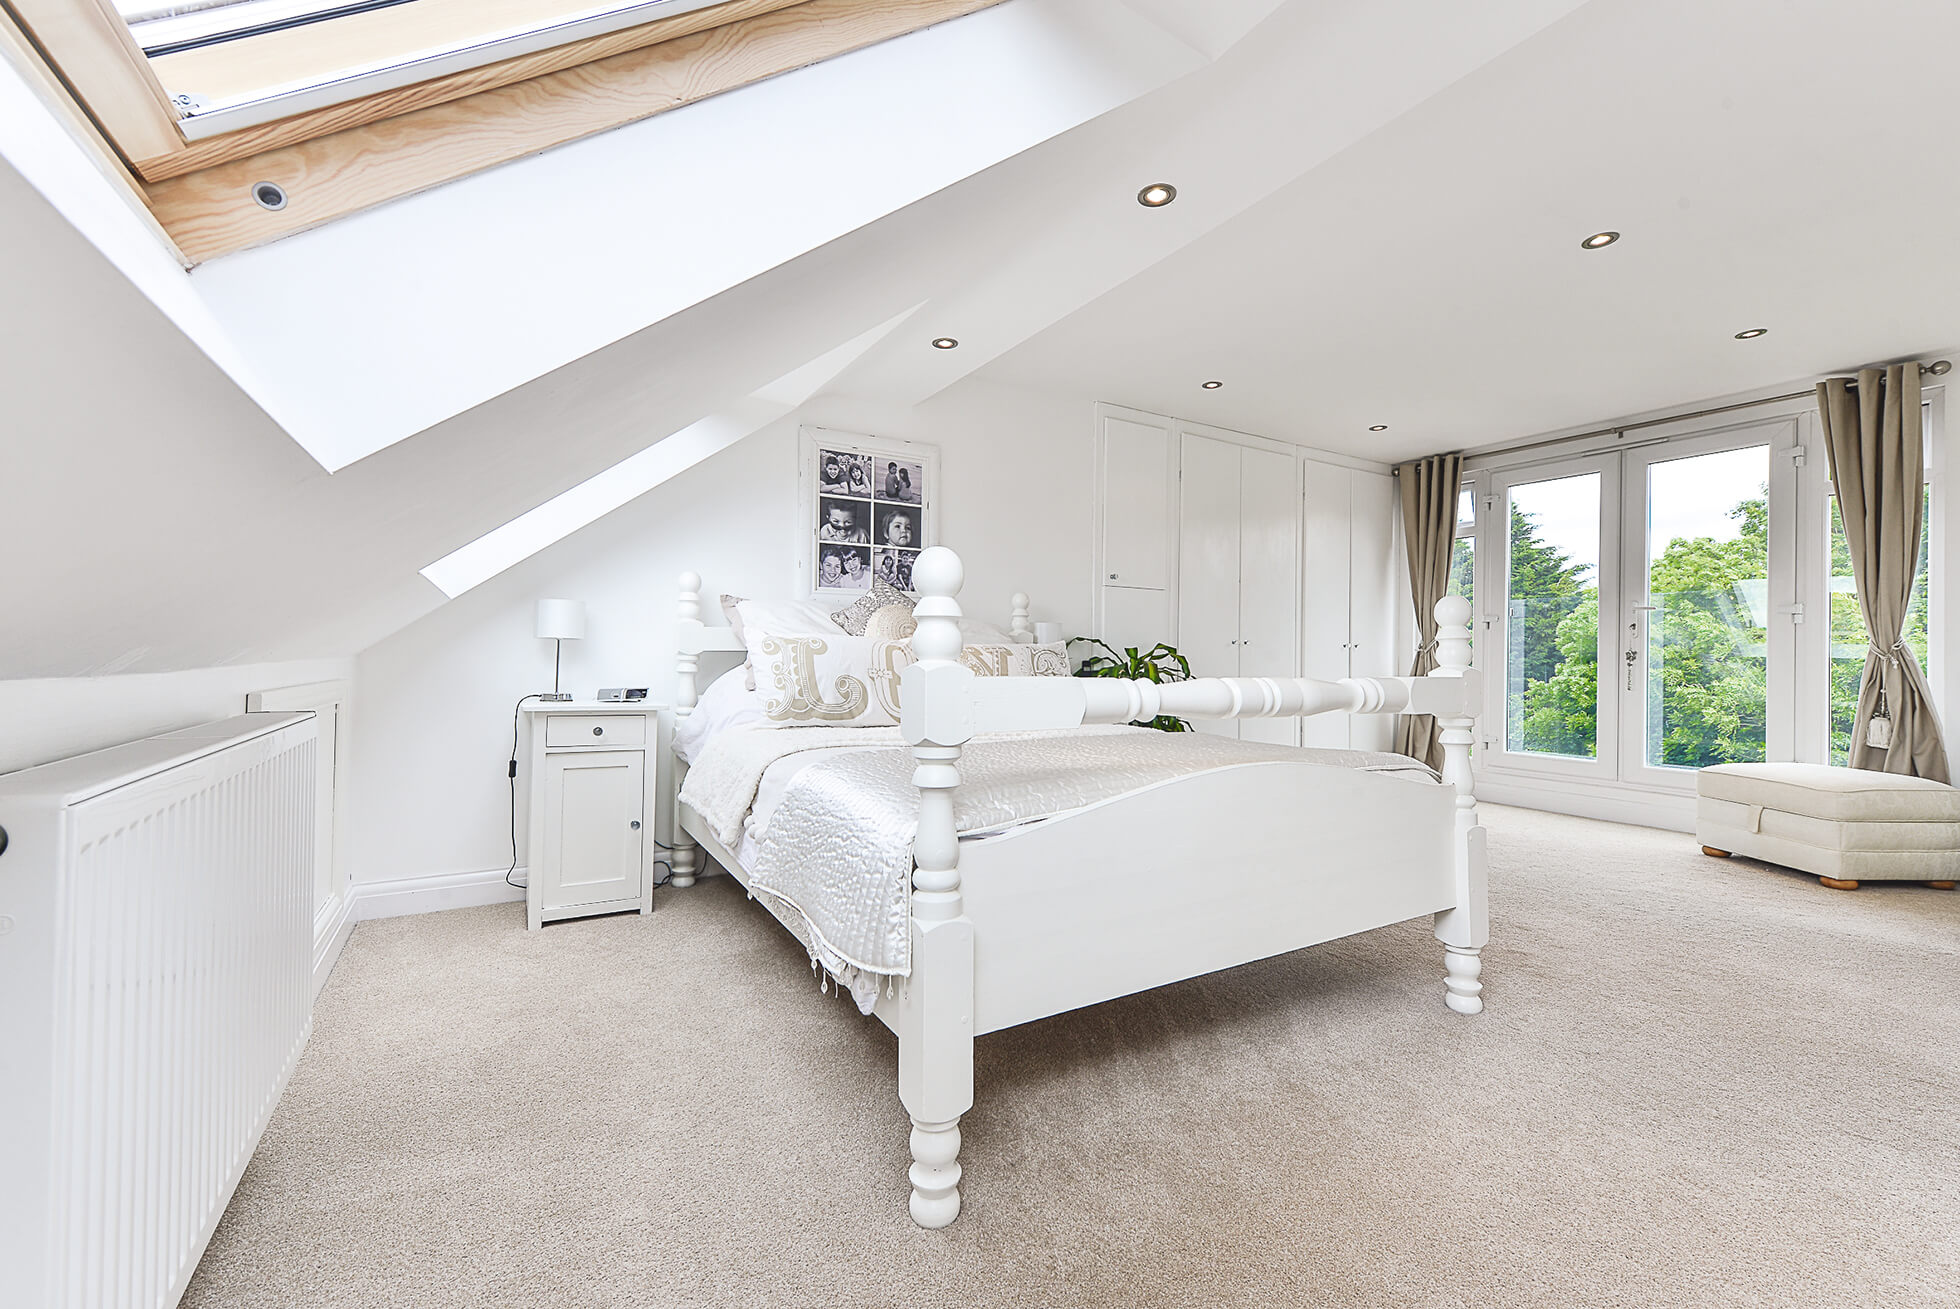 Do you have a question about converting your Loft in Braughing Friars? Here are the most popular questions asked by our clients.